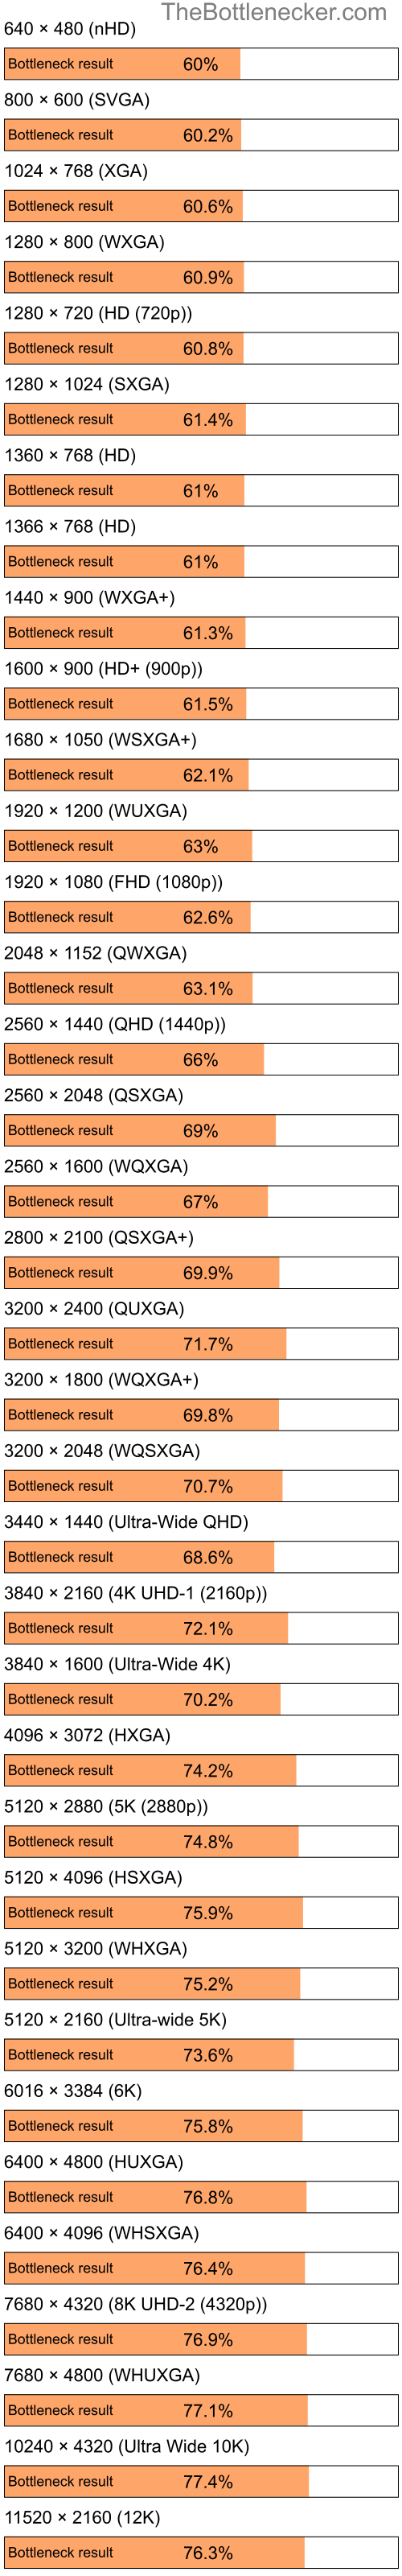 Bottleneck results by resolution for Intel Atom Z520 and NVIDIA Quadro FX 3400 in General Tasks